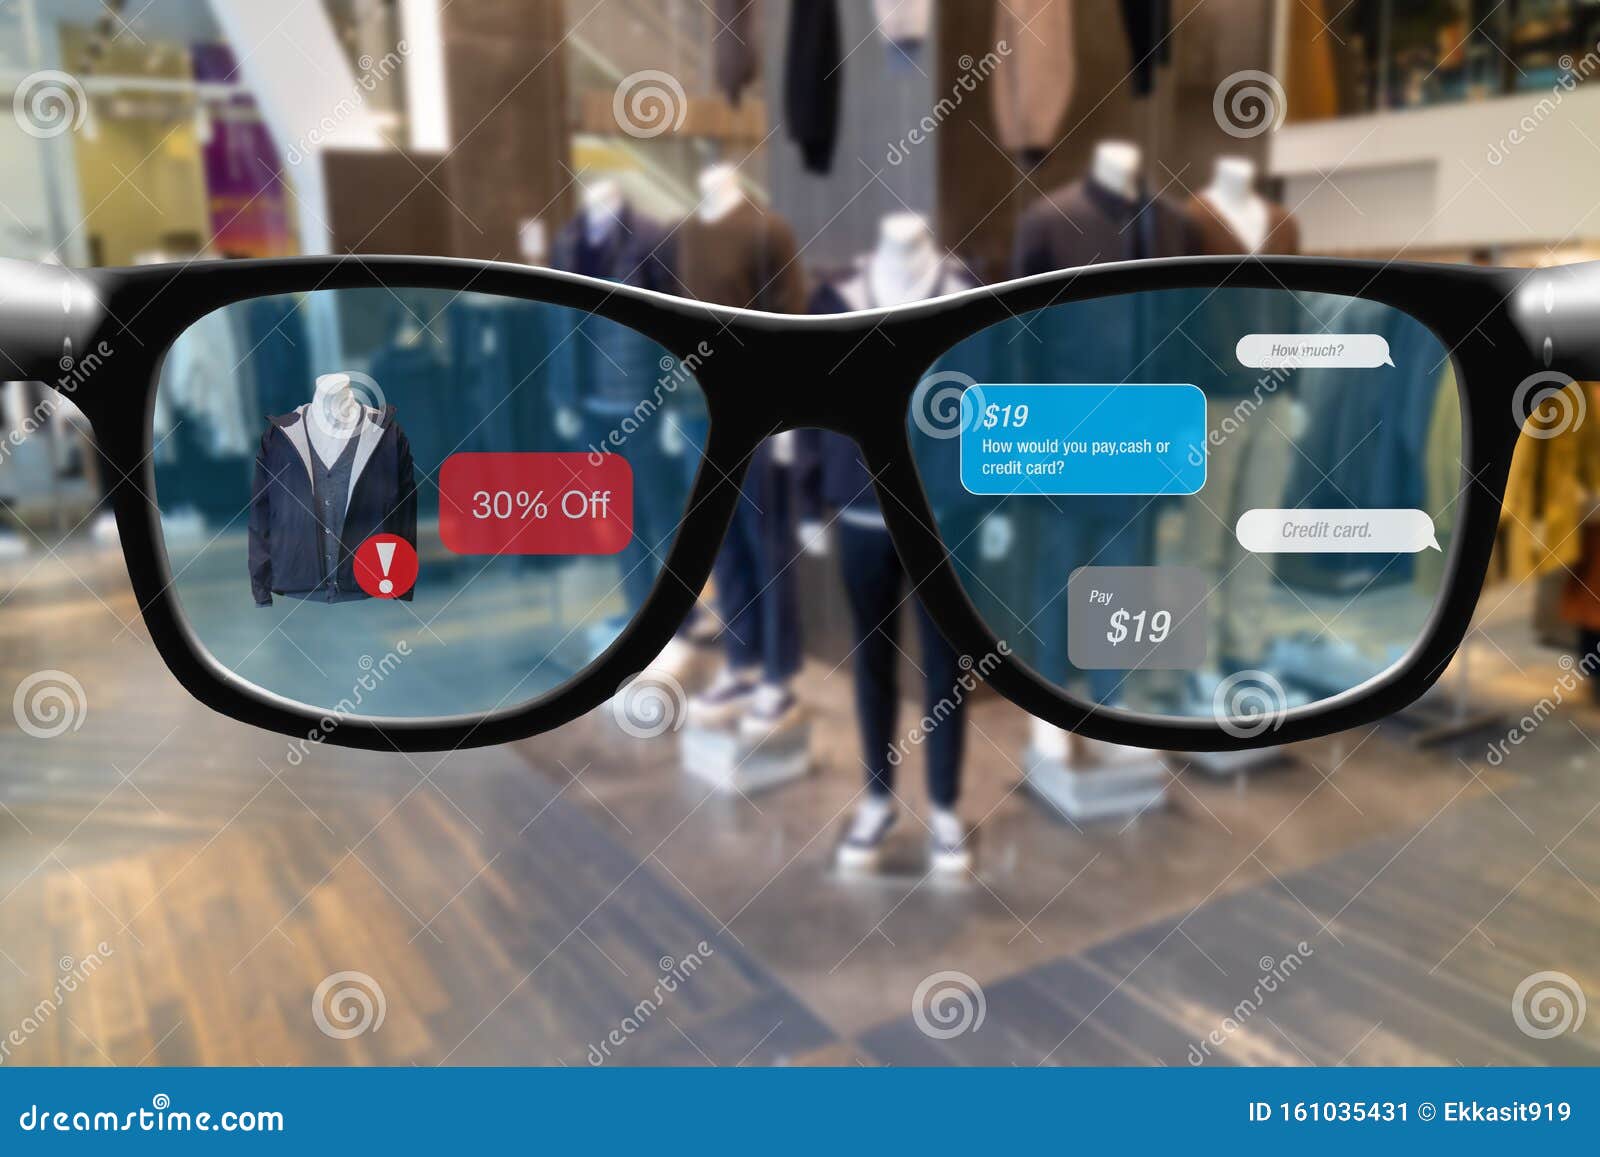 smart glasses with augmented mixed virtual reality in retail concept , customer use artificial intelligence, geofencing and chatbo